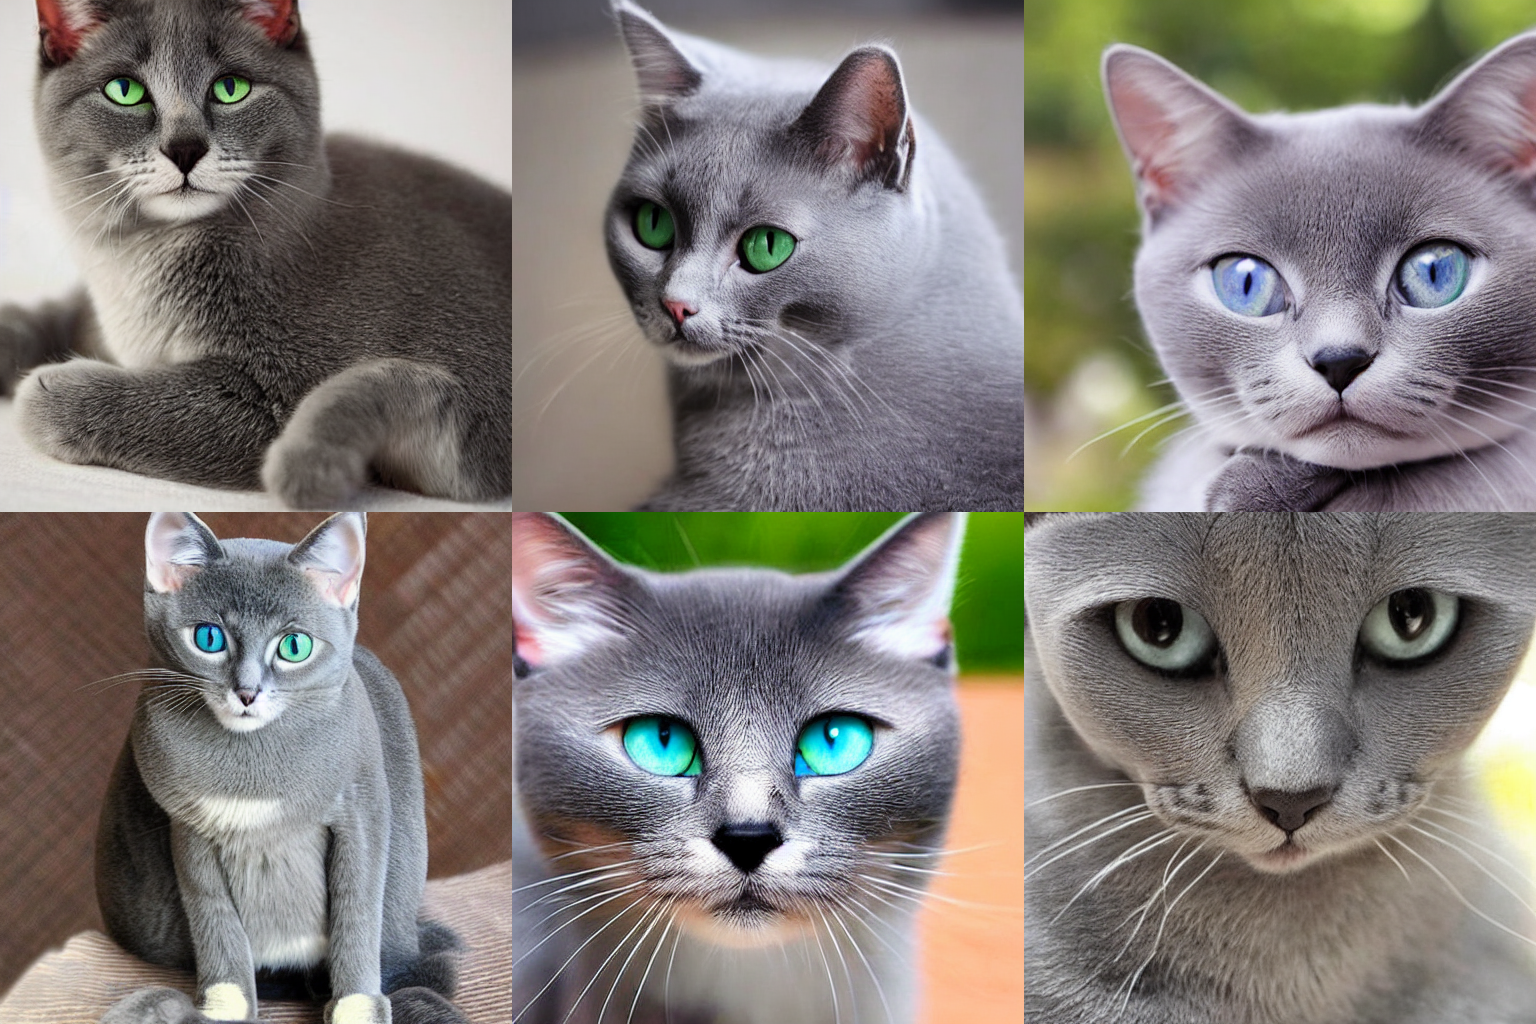 A panel of 6 output images from Stable Diffusion using the prompt &quot;Cute grey cat.&quot;